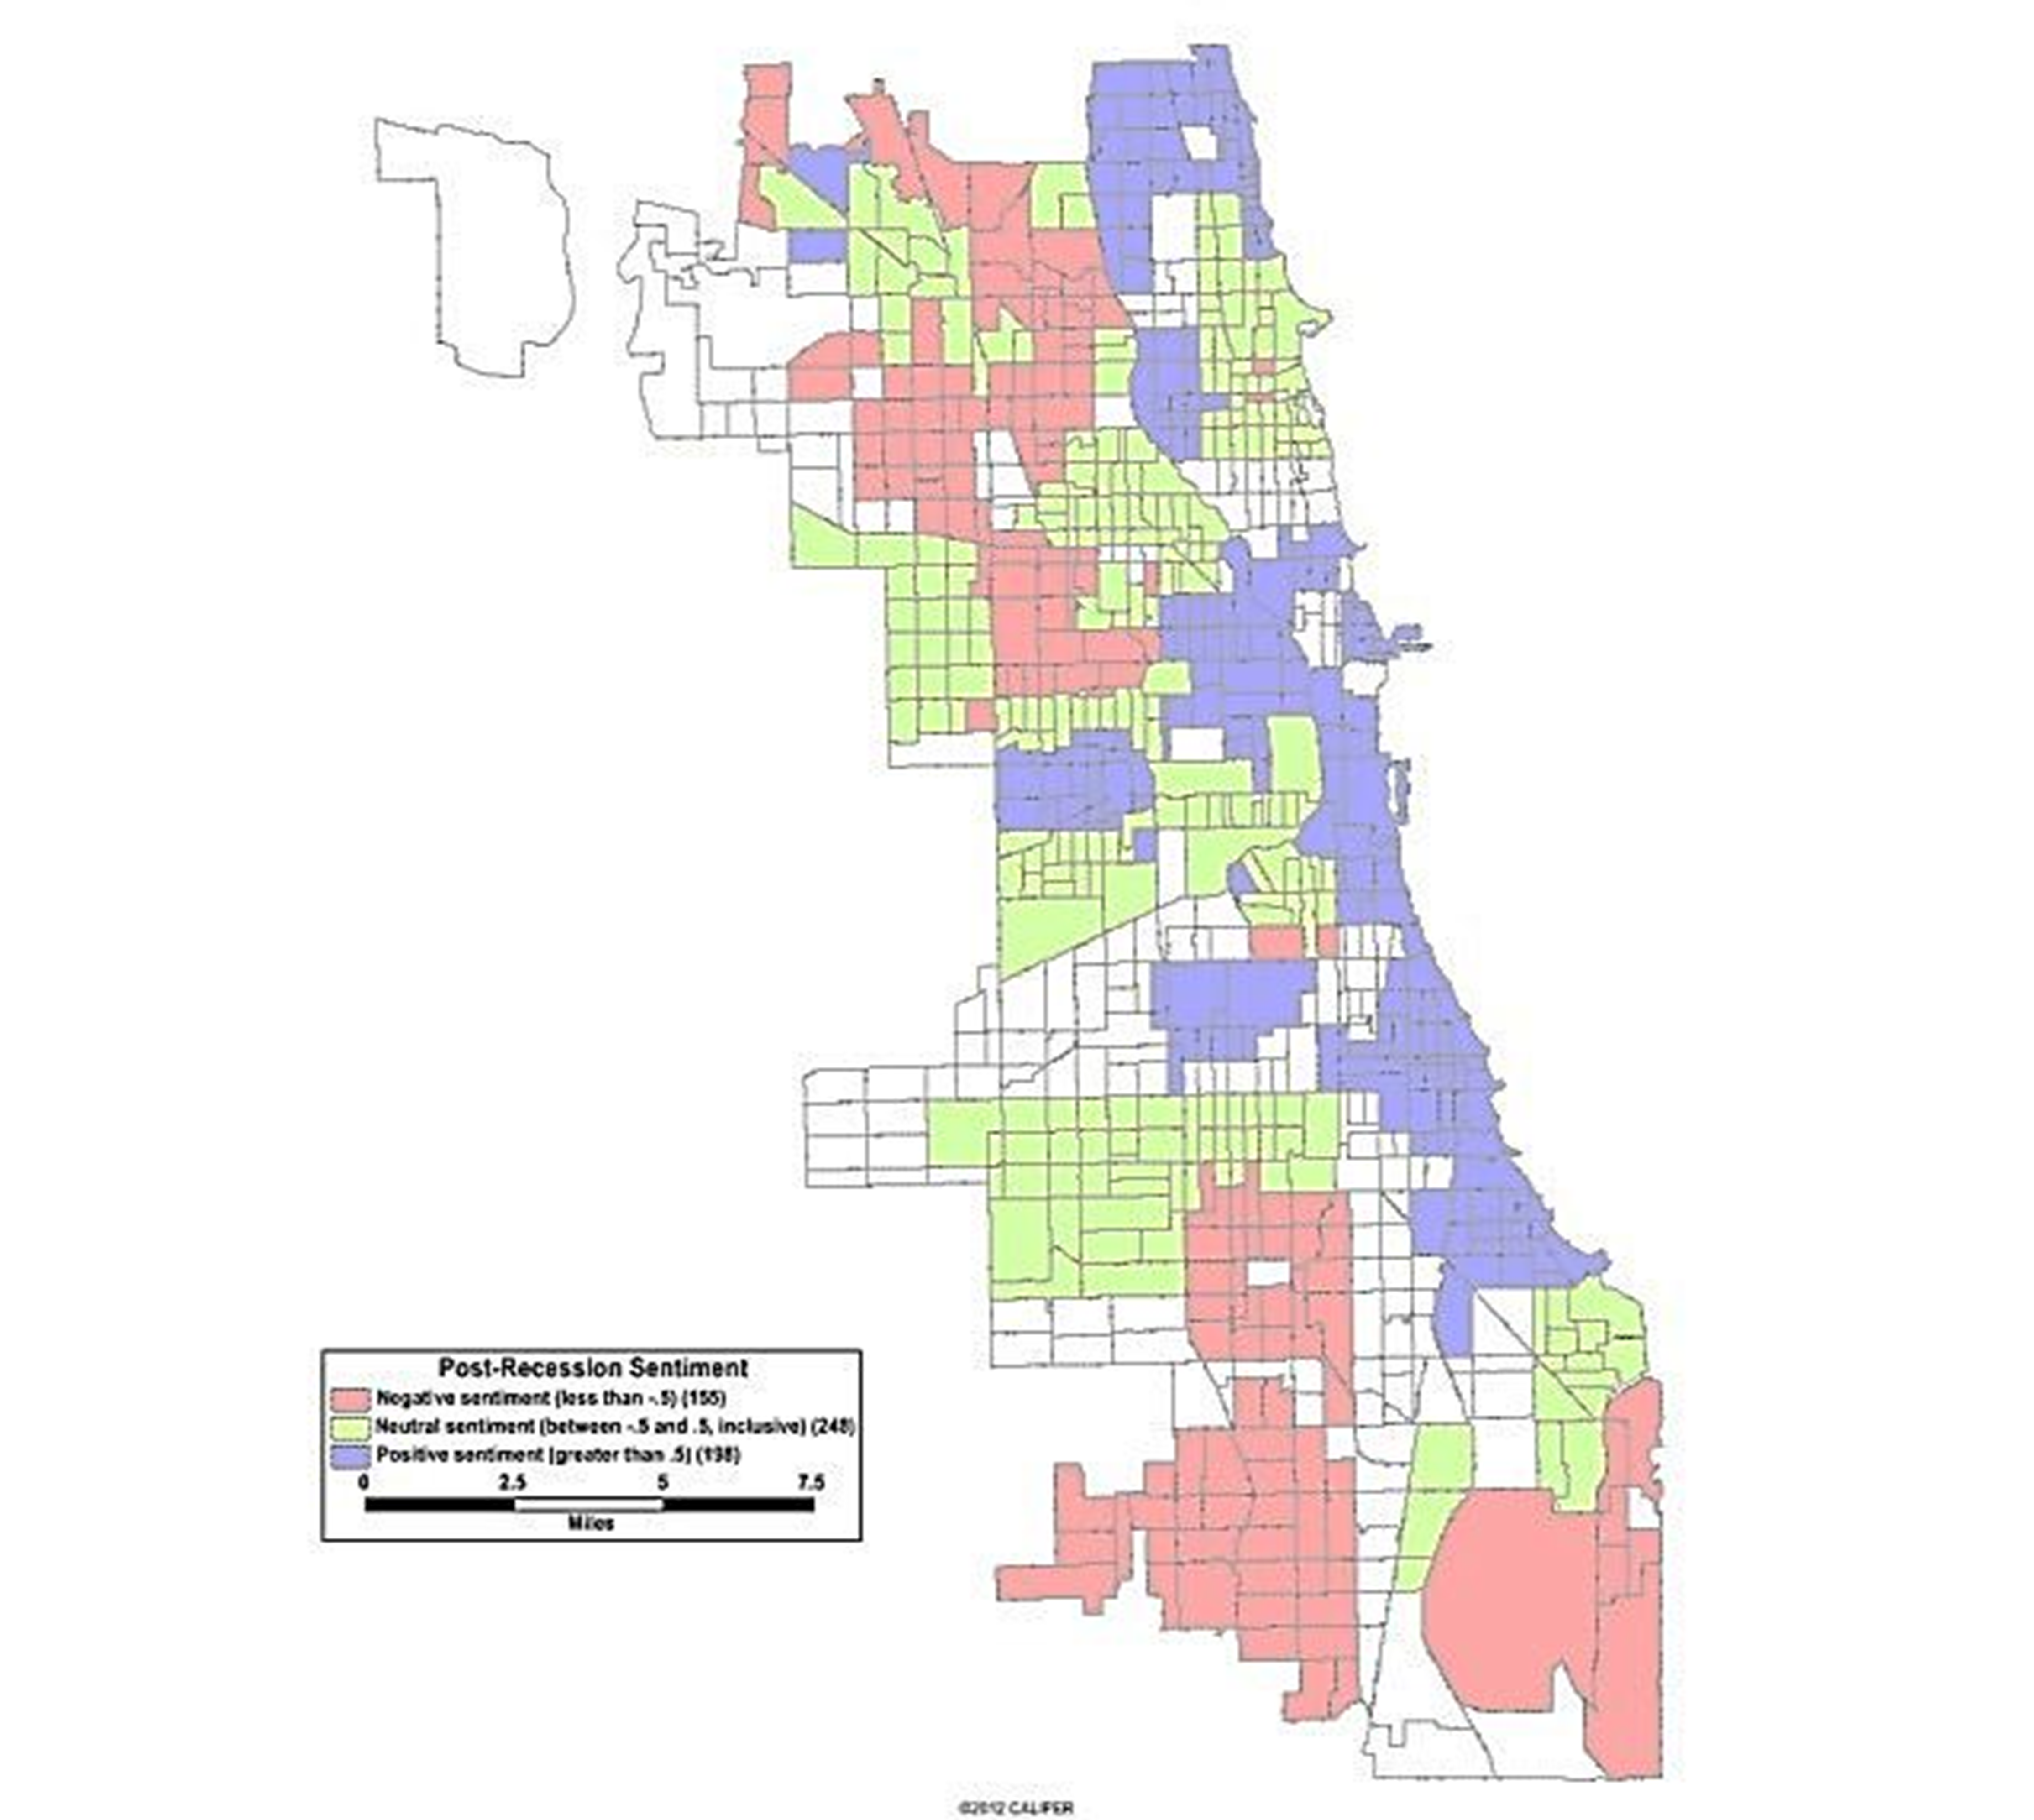 Map showing post-recession sentiment of various Chicago neighborhood. Most neighborhoods report negative or neutral sentiment, but there are still pockets of positivist, mostly on the lake shore. 